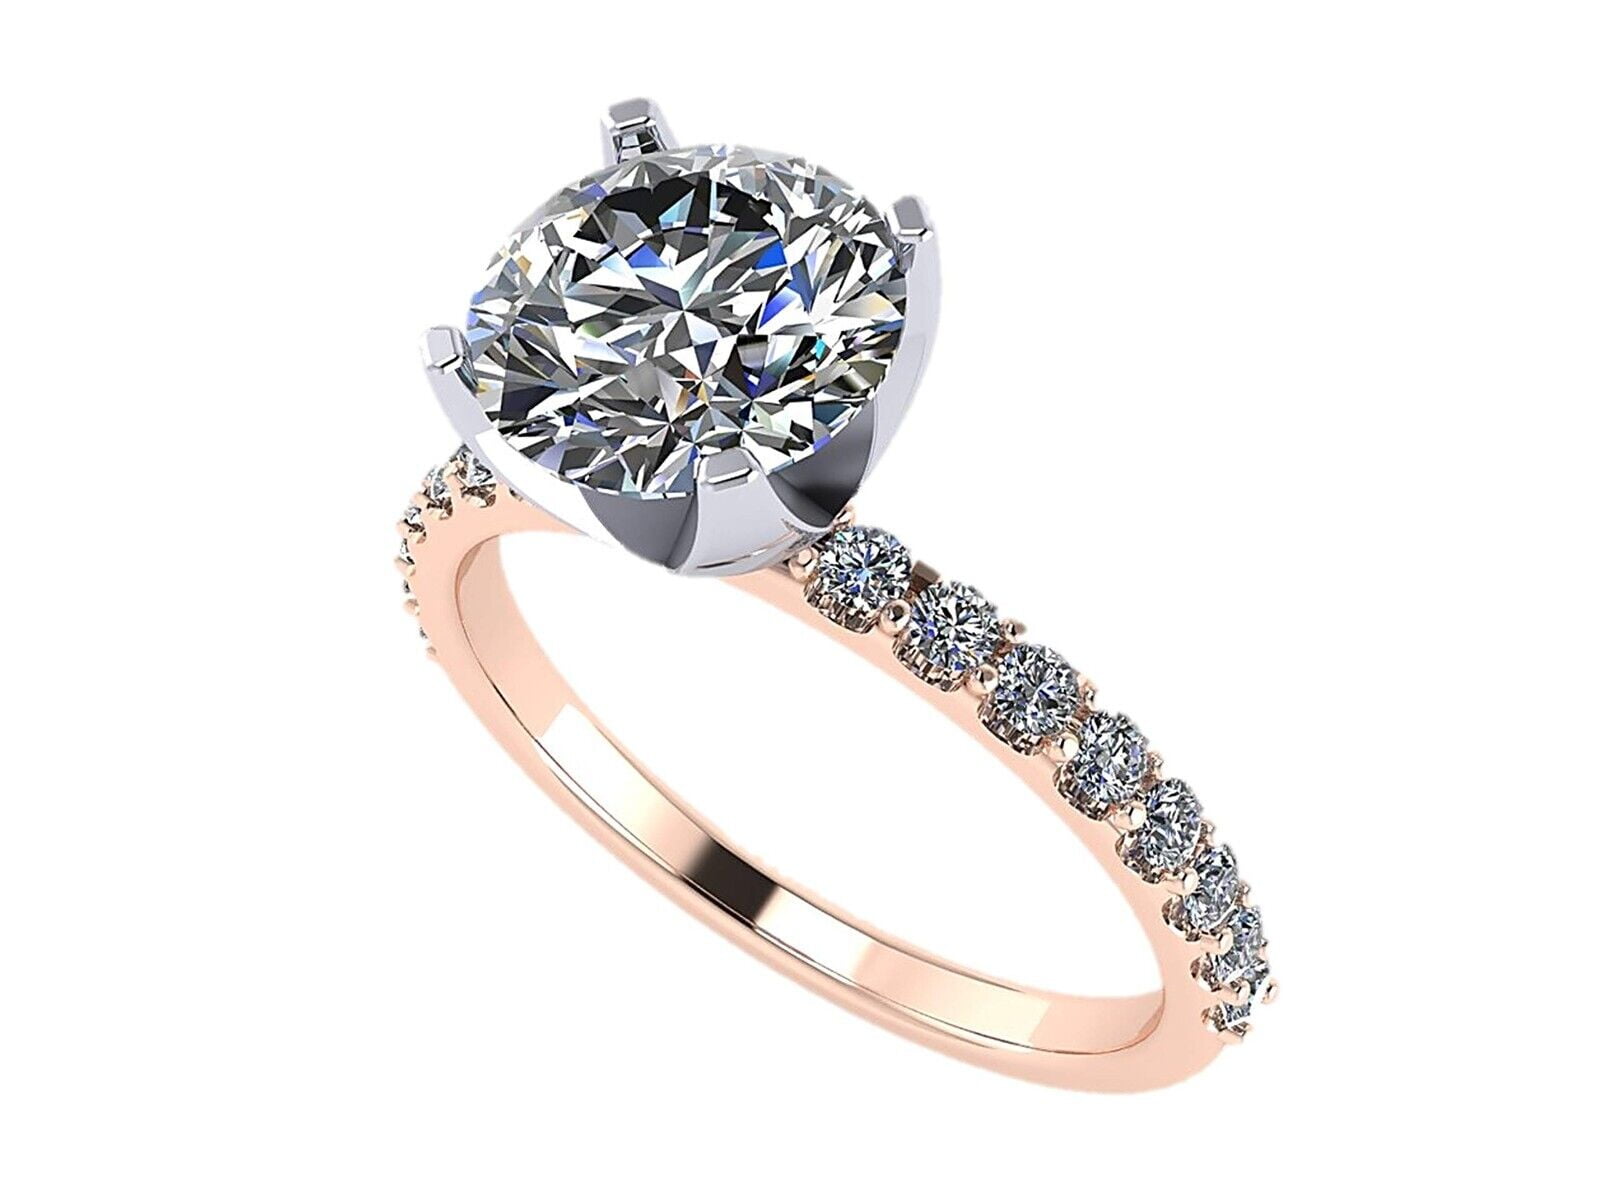 Round Cut Zirconia Solitaire W/ Side CZs Engagement Ring 10.0mm (4.00ct)  10K Rose Gold Size 4.5